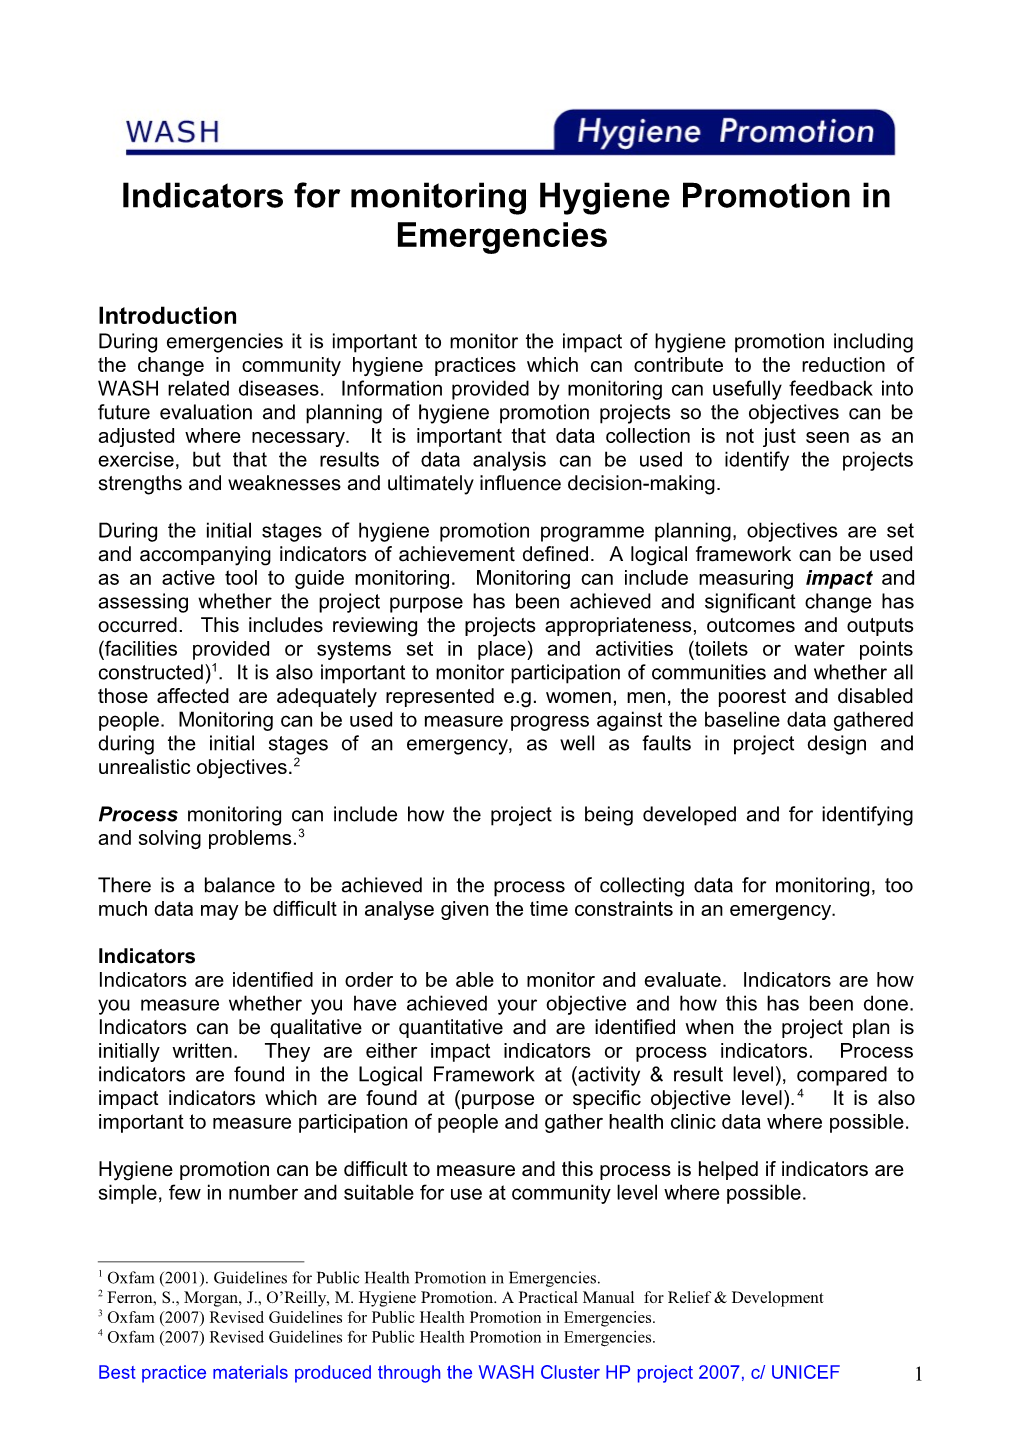 Indicators for Monitoring Hygiene Promotion in Emergencies